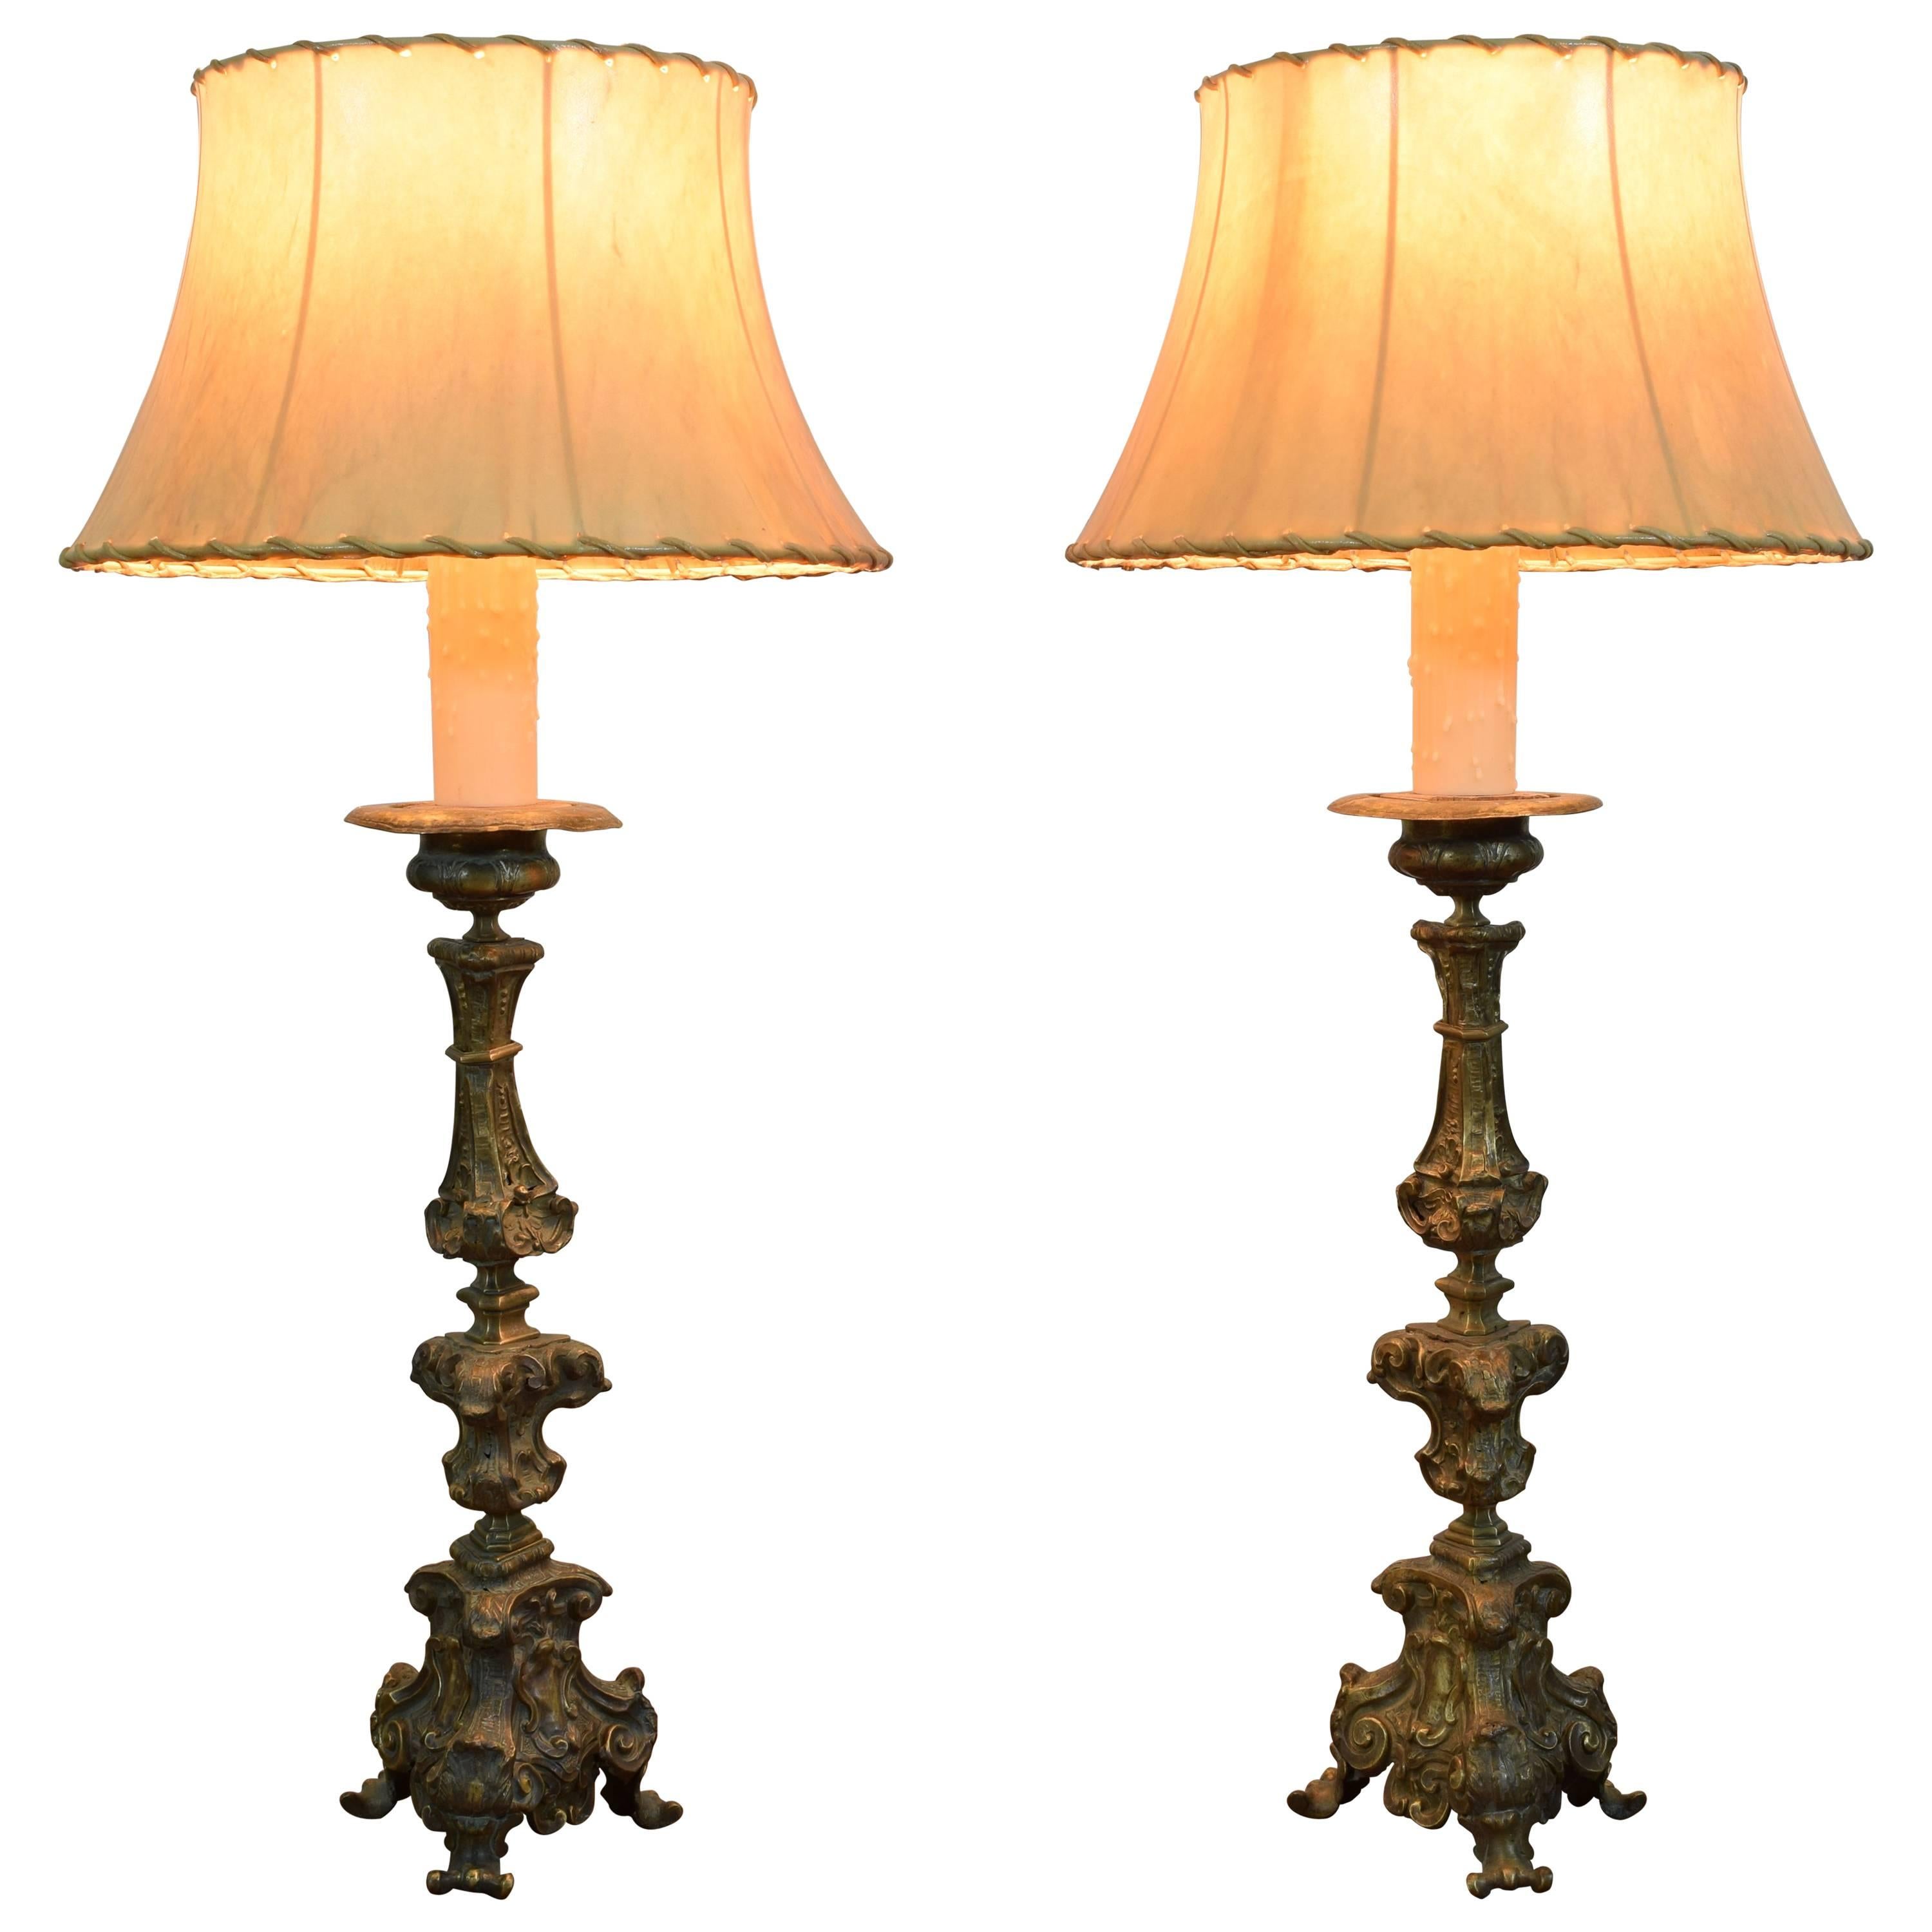 Italian Rococo Pair of Patinated Brass Table Lamps, Mid-18th Century